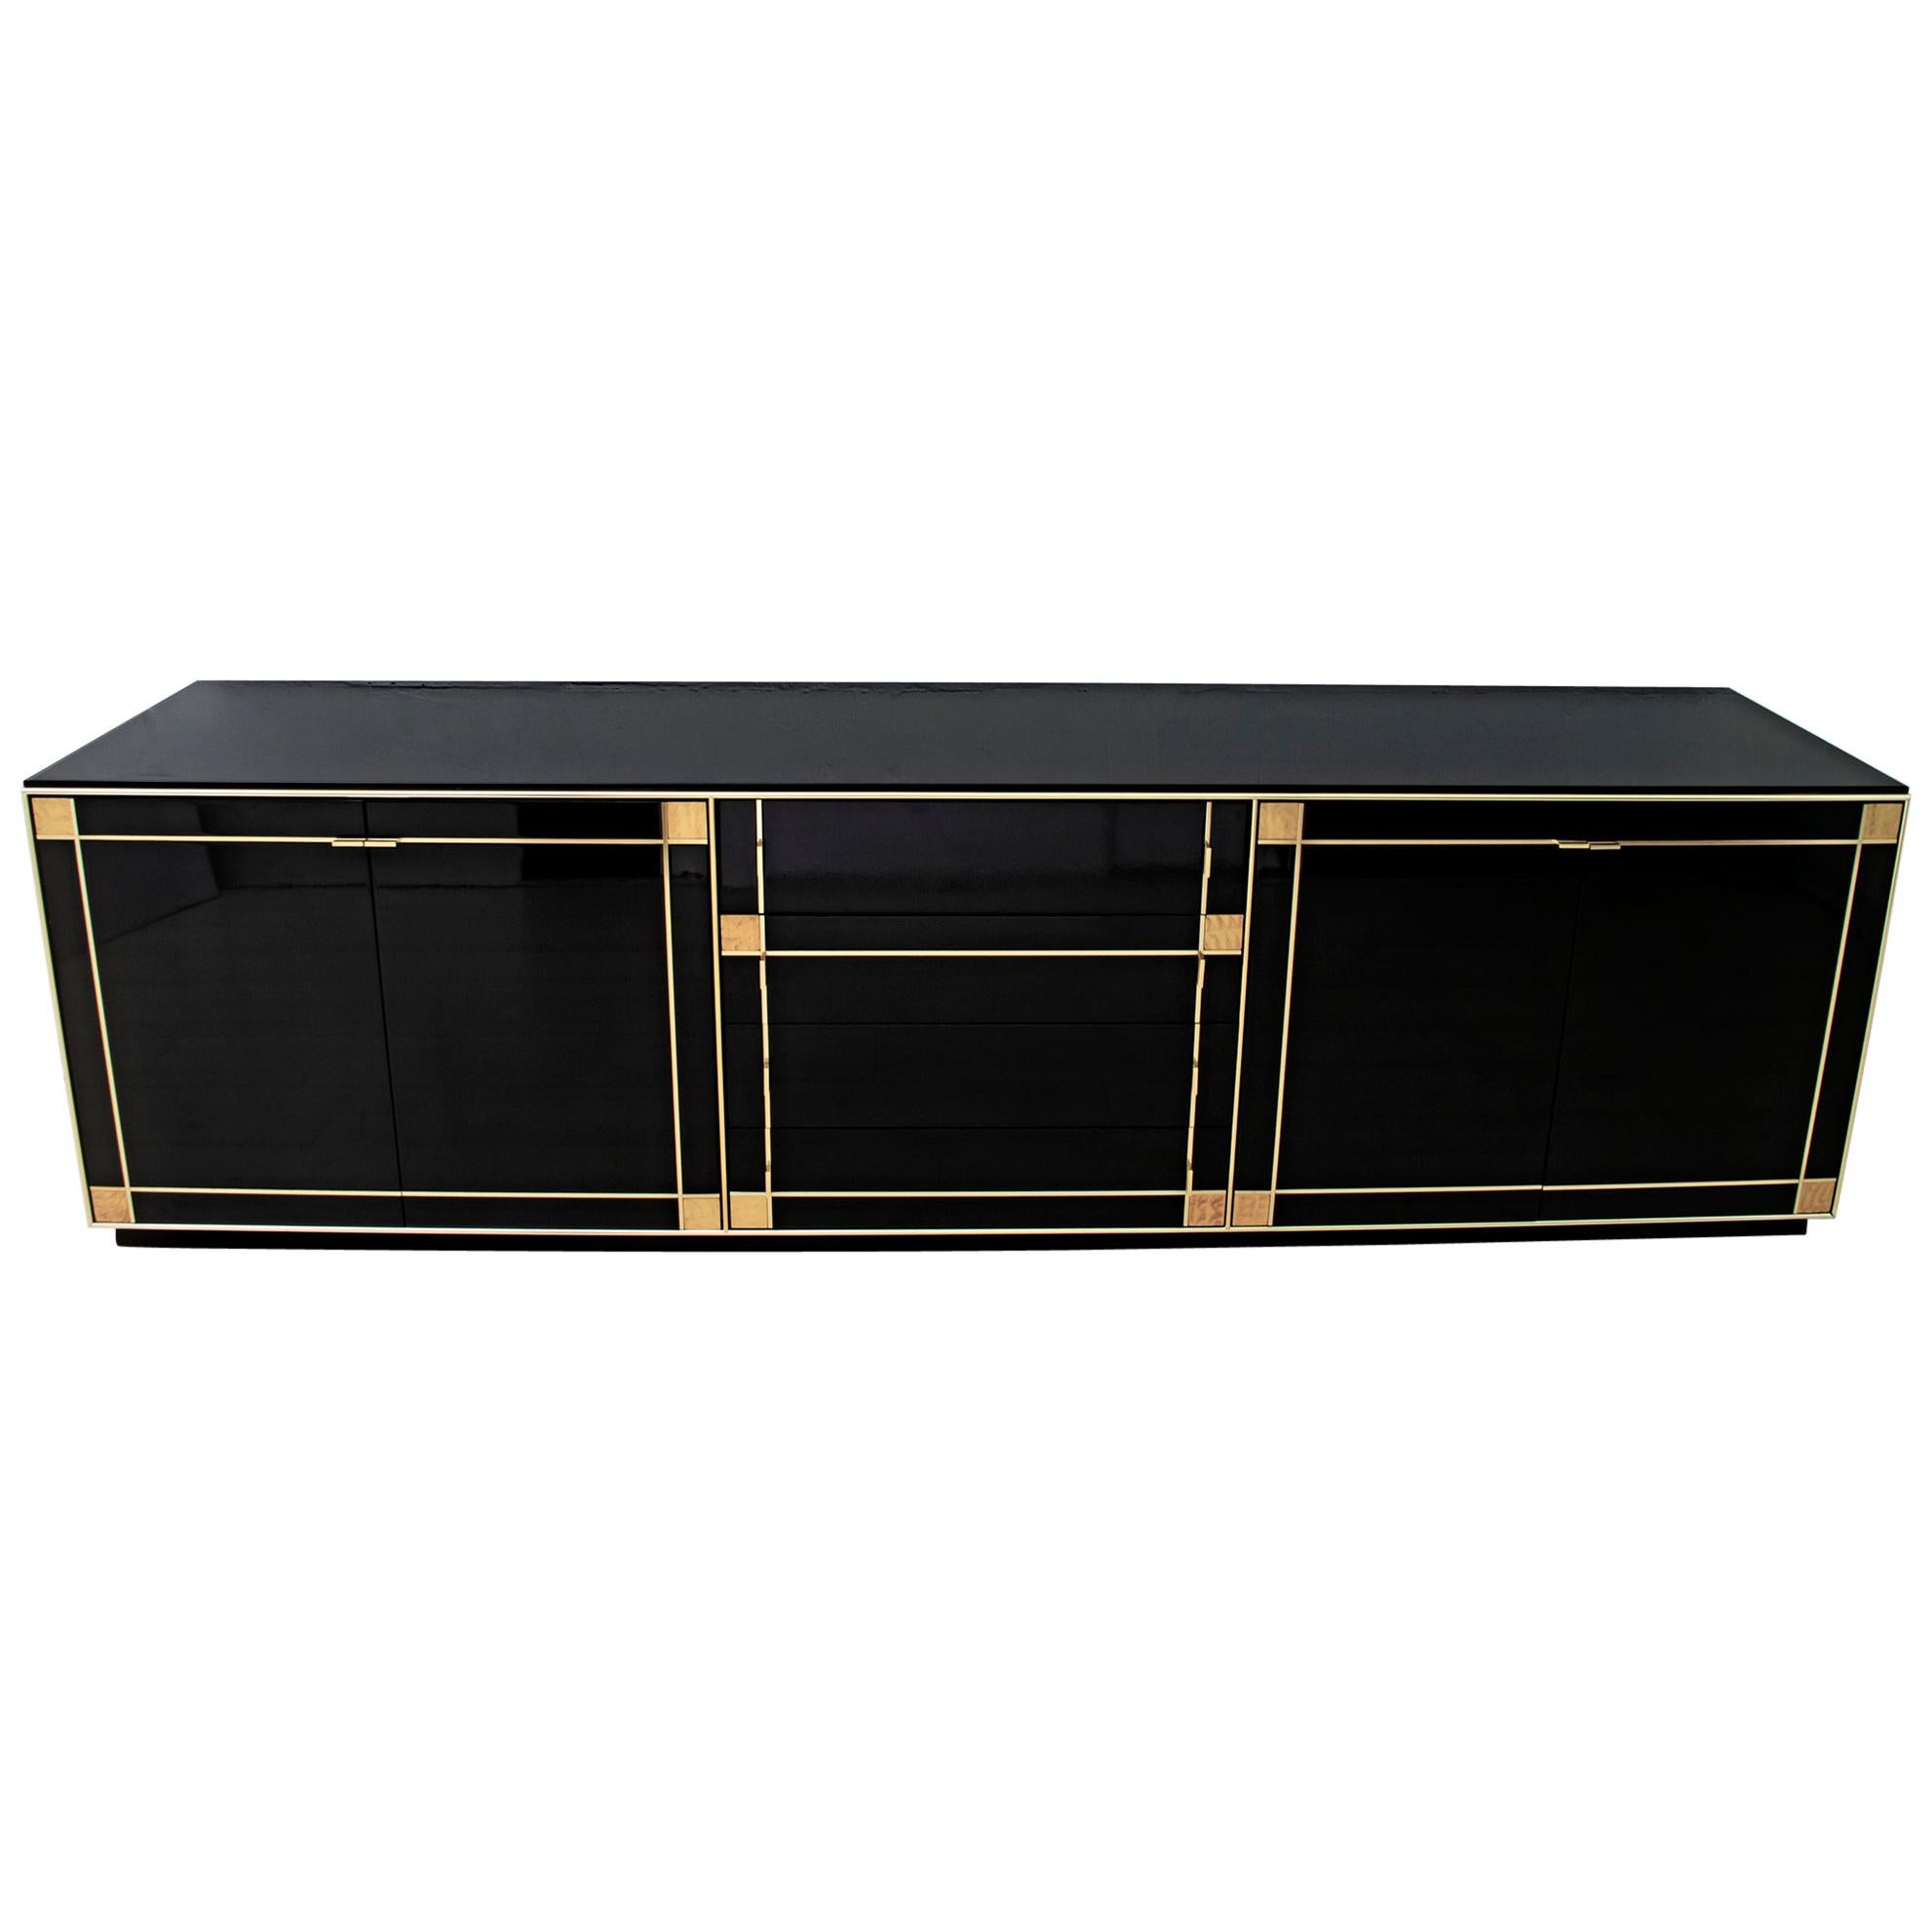 Pierre Cardin Black Lacquered Sideboard with Brass Details, 1980s